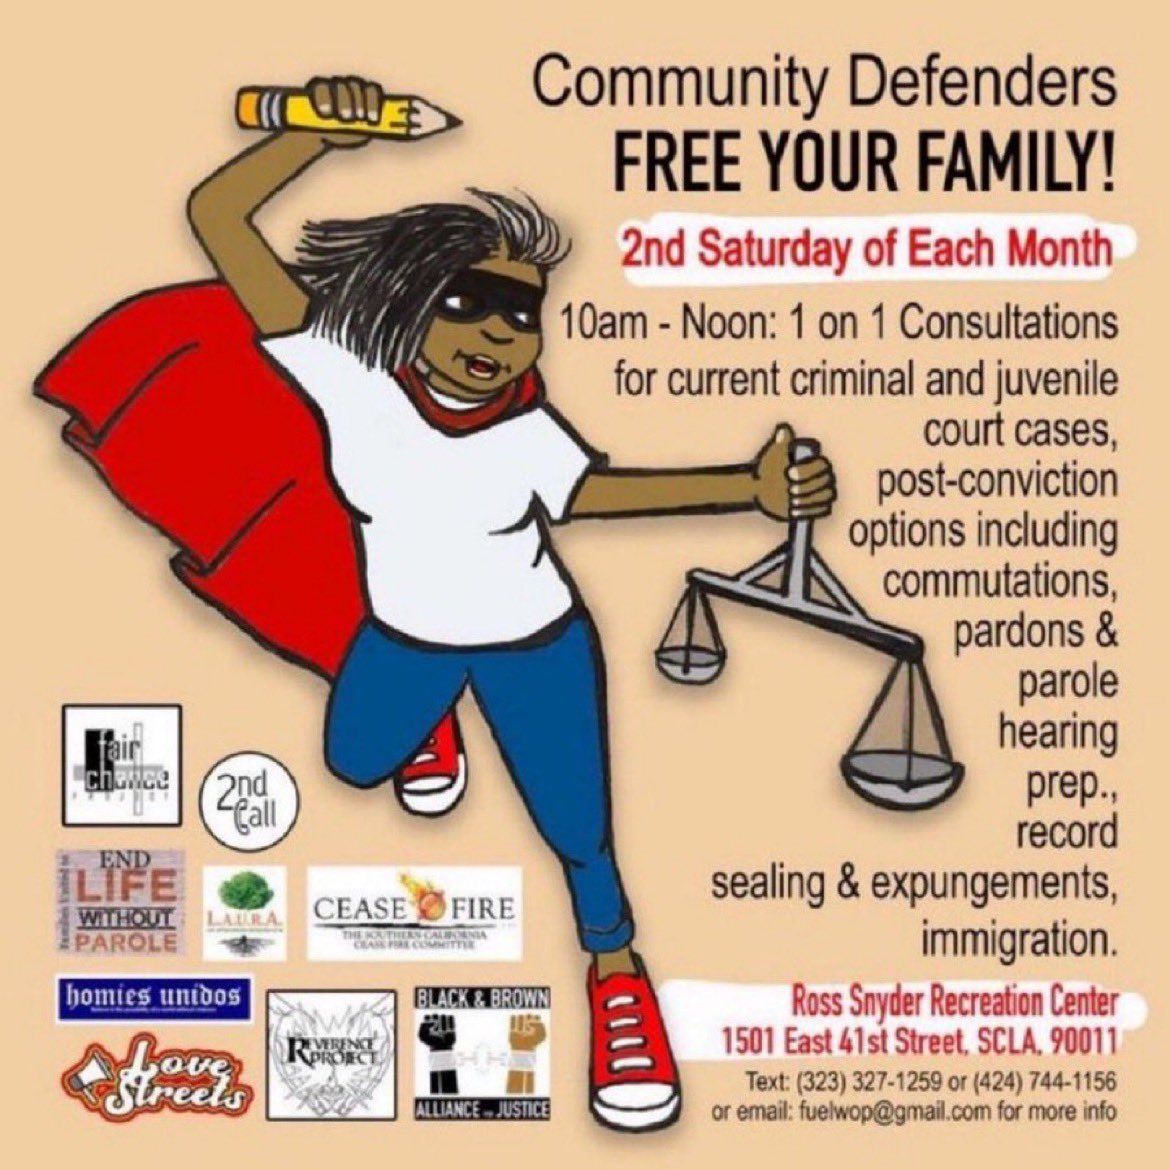 Flyer: Saturday May 10th, free community defender resources at the Ross Snyder Rec Center in LA